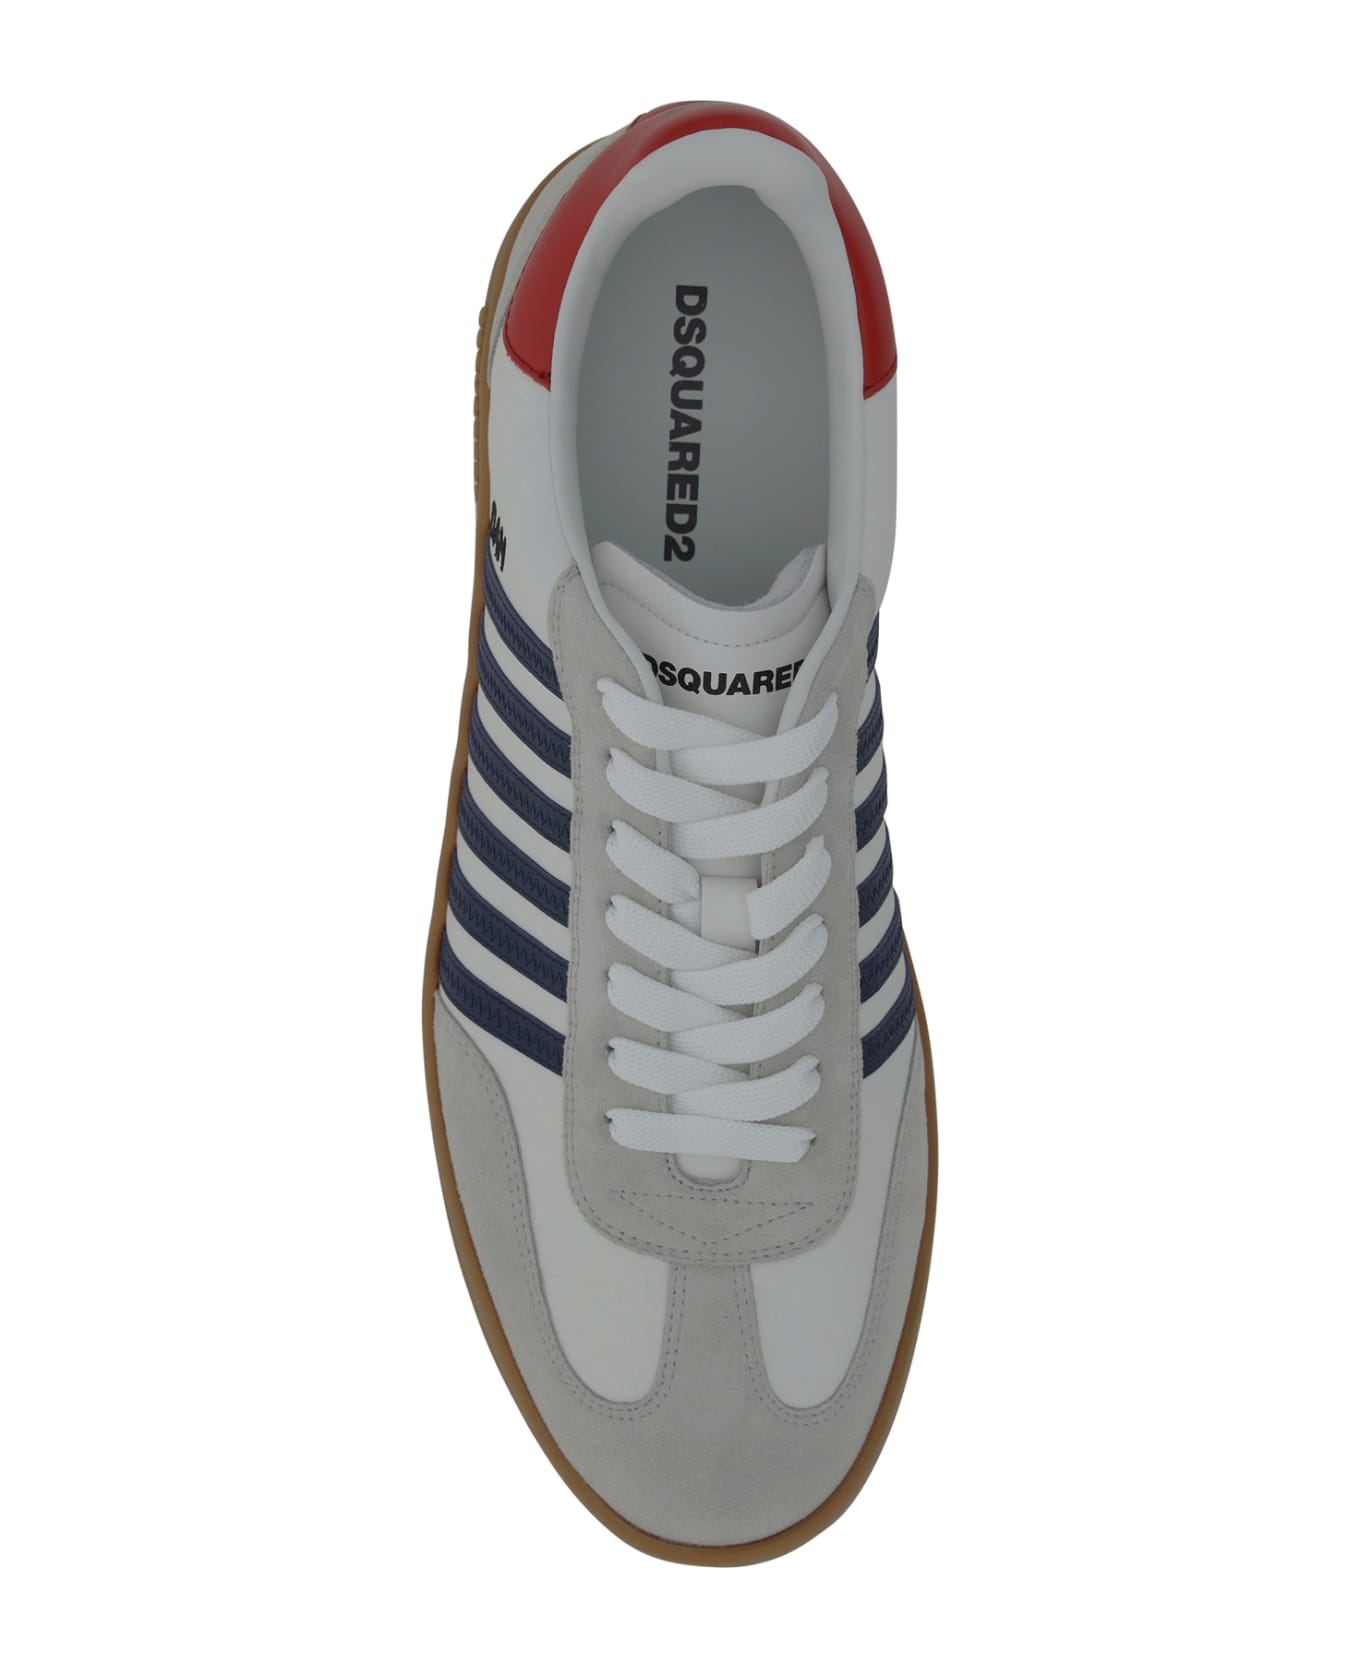 Dsquared2 Sneakers - Bianco+blu+rosso スニーカー